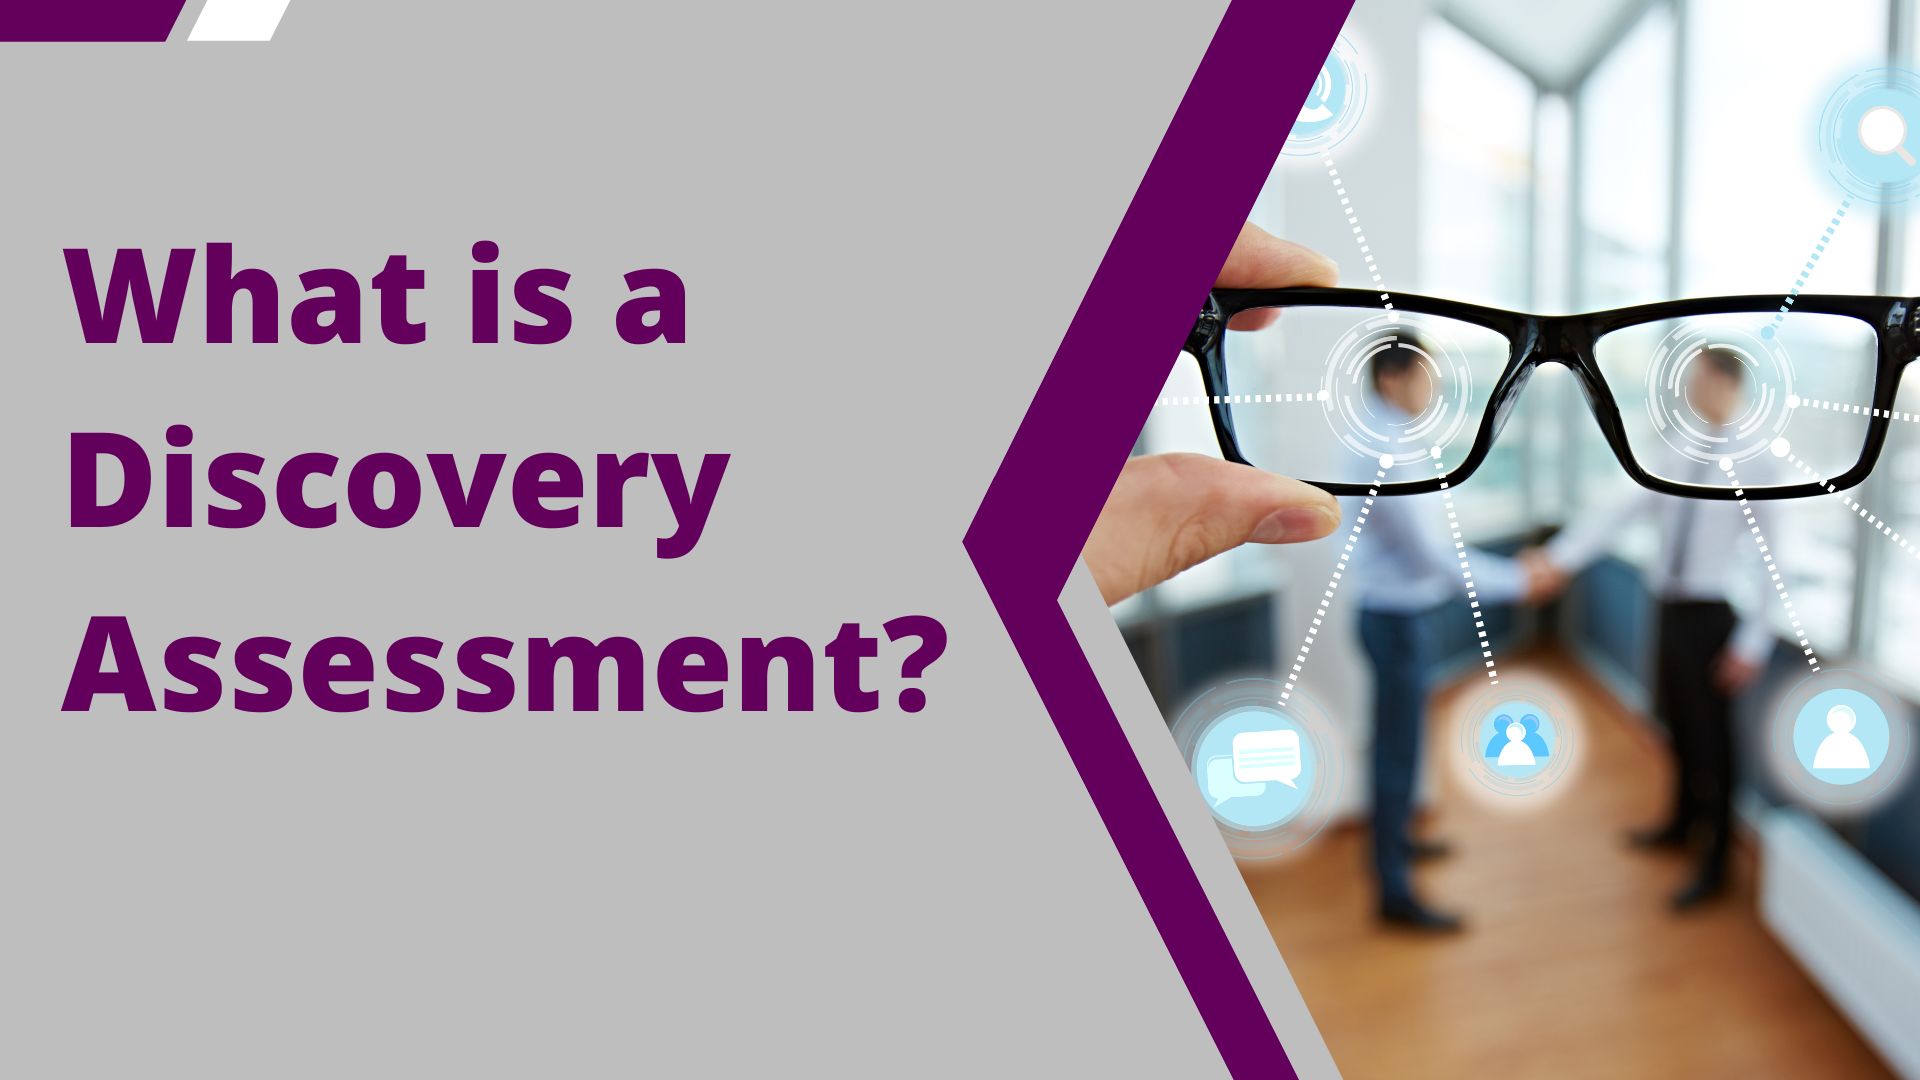 What is a discovery assessment image showing glasses to represent looking deeper into issues